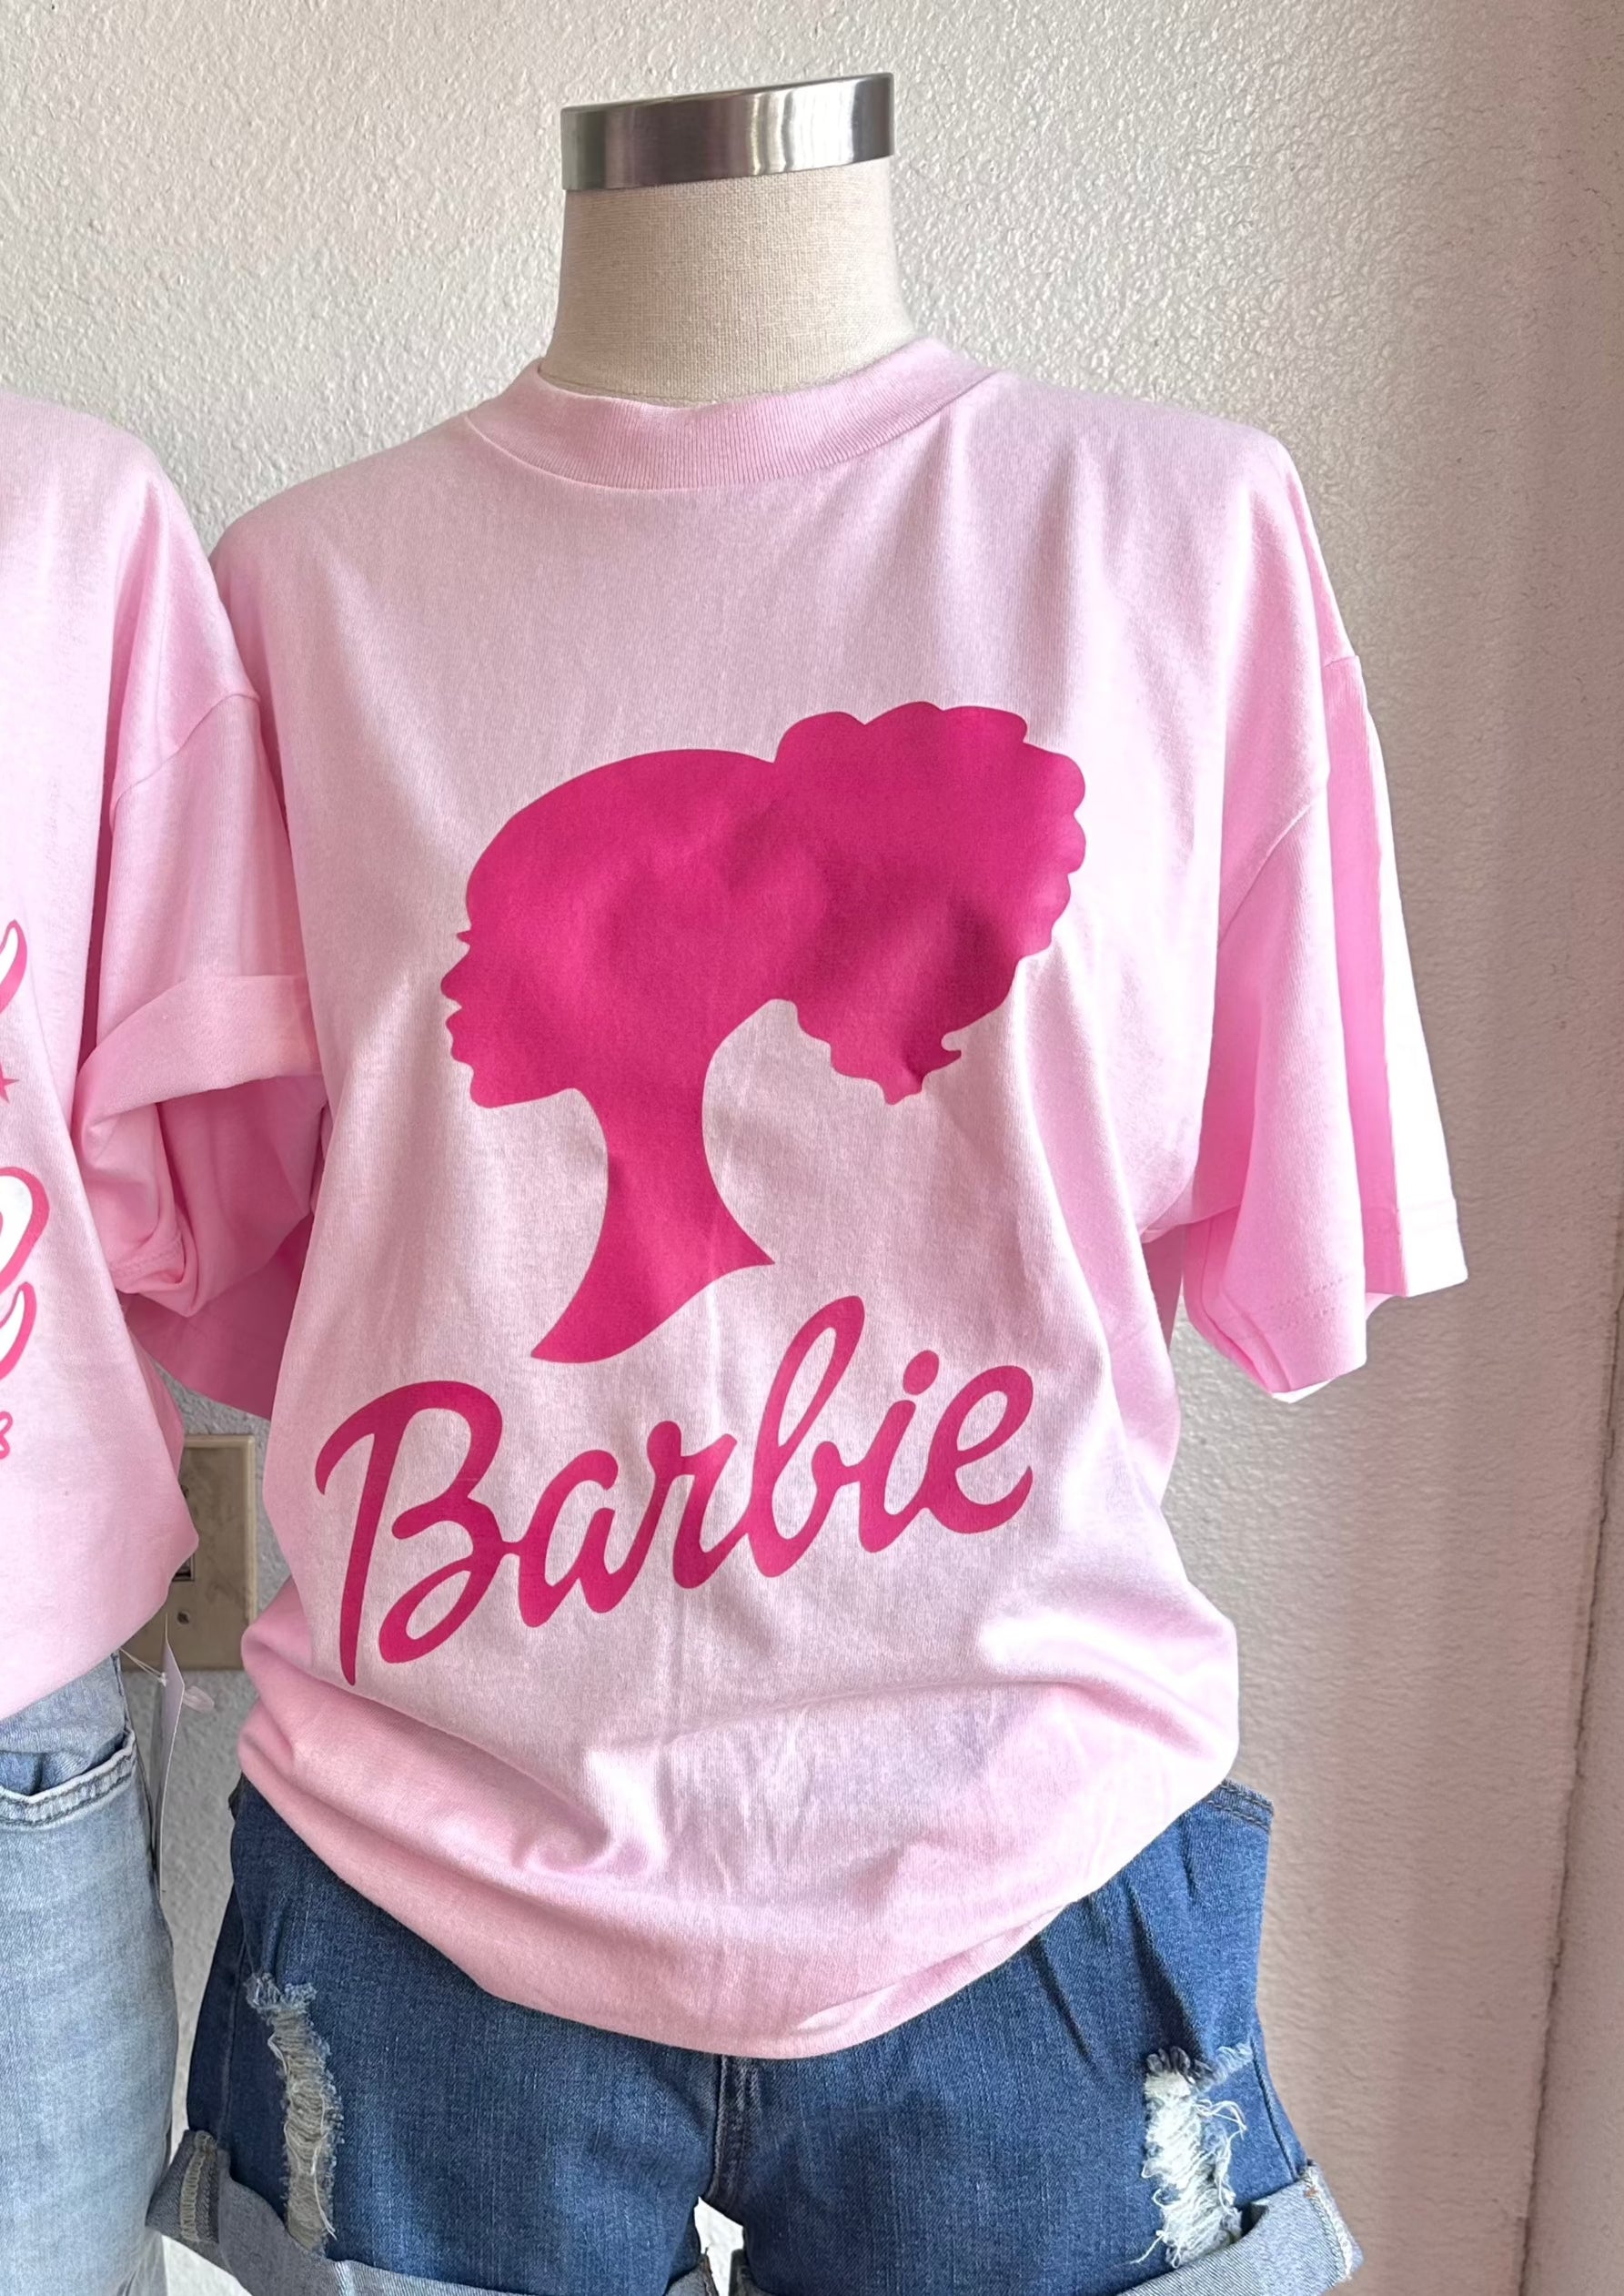 Barbie inspired white t-shirt, pink barbie silhouette – www.thesmithco